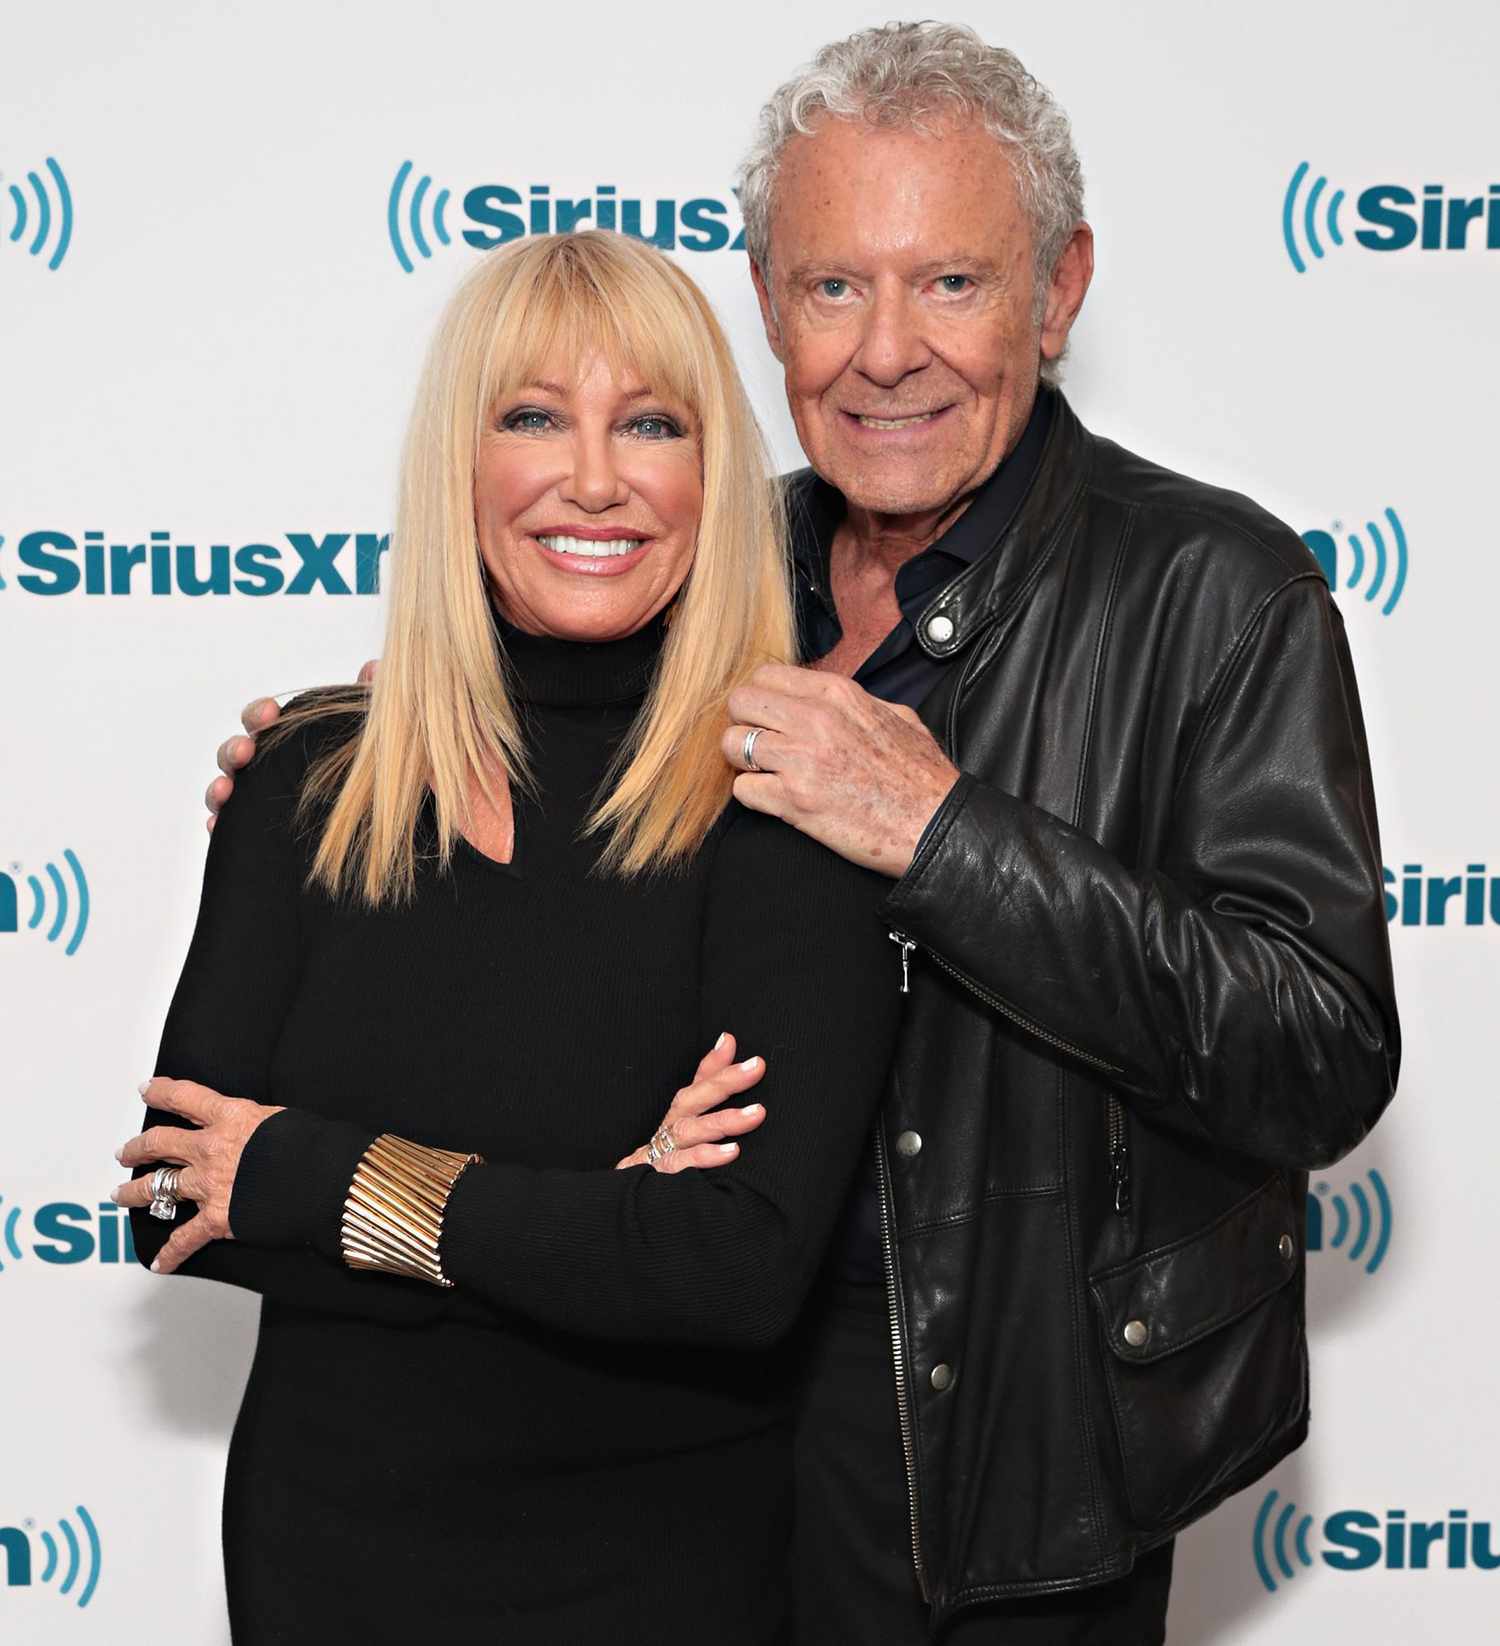 Suzanne Somers Gets Really Personal About Her Very Active Sex Life